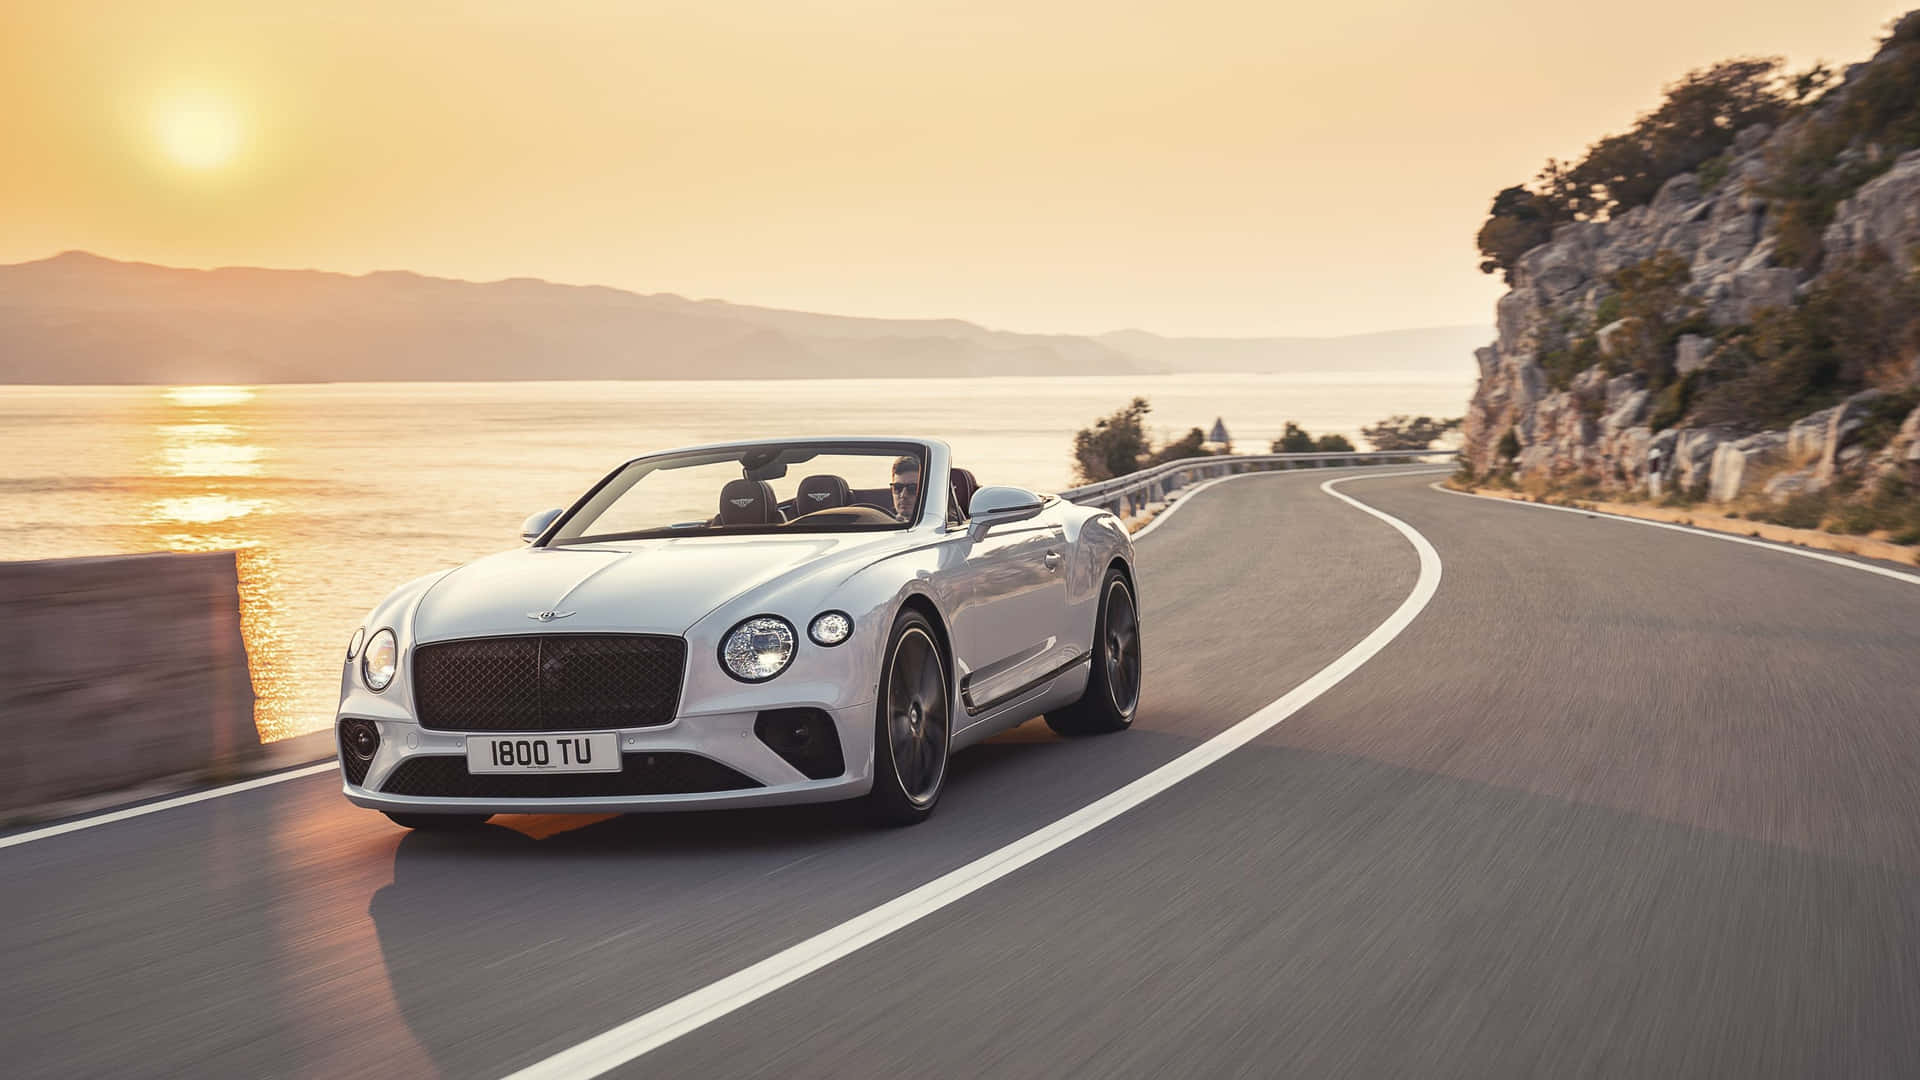 The Bentley Continental Gt - V Driving Down A Road